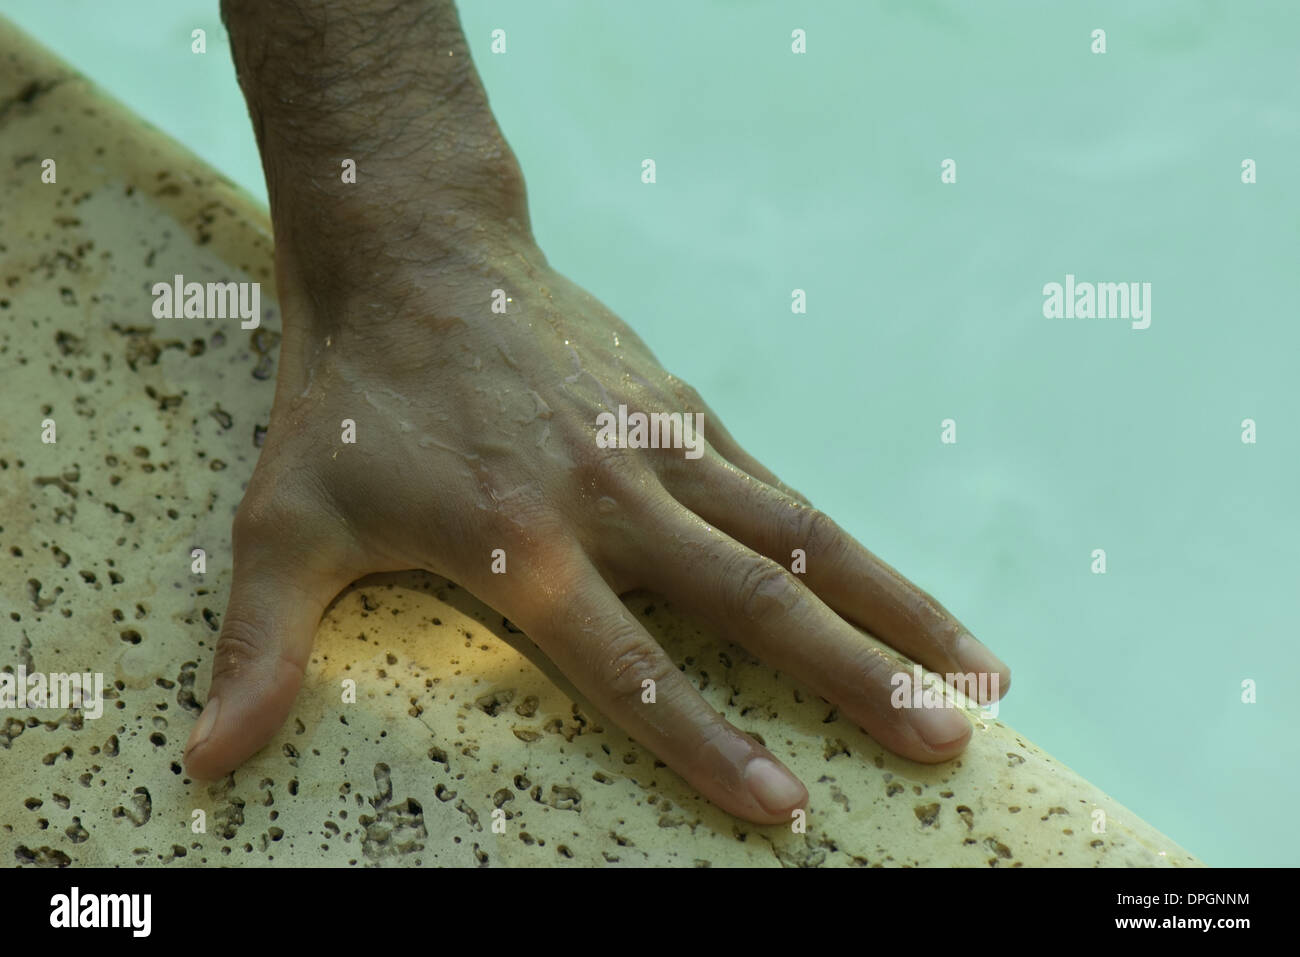 Man's wet hand on side of pool Stock Photo